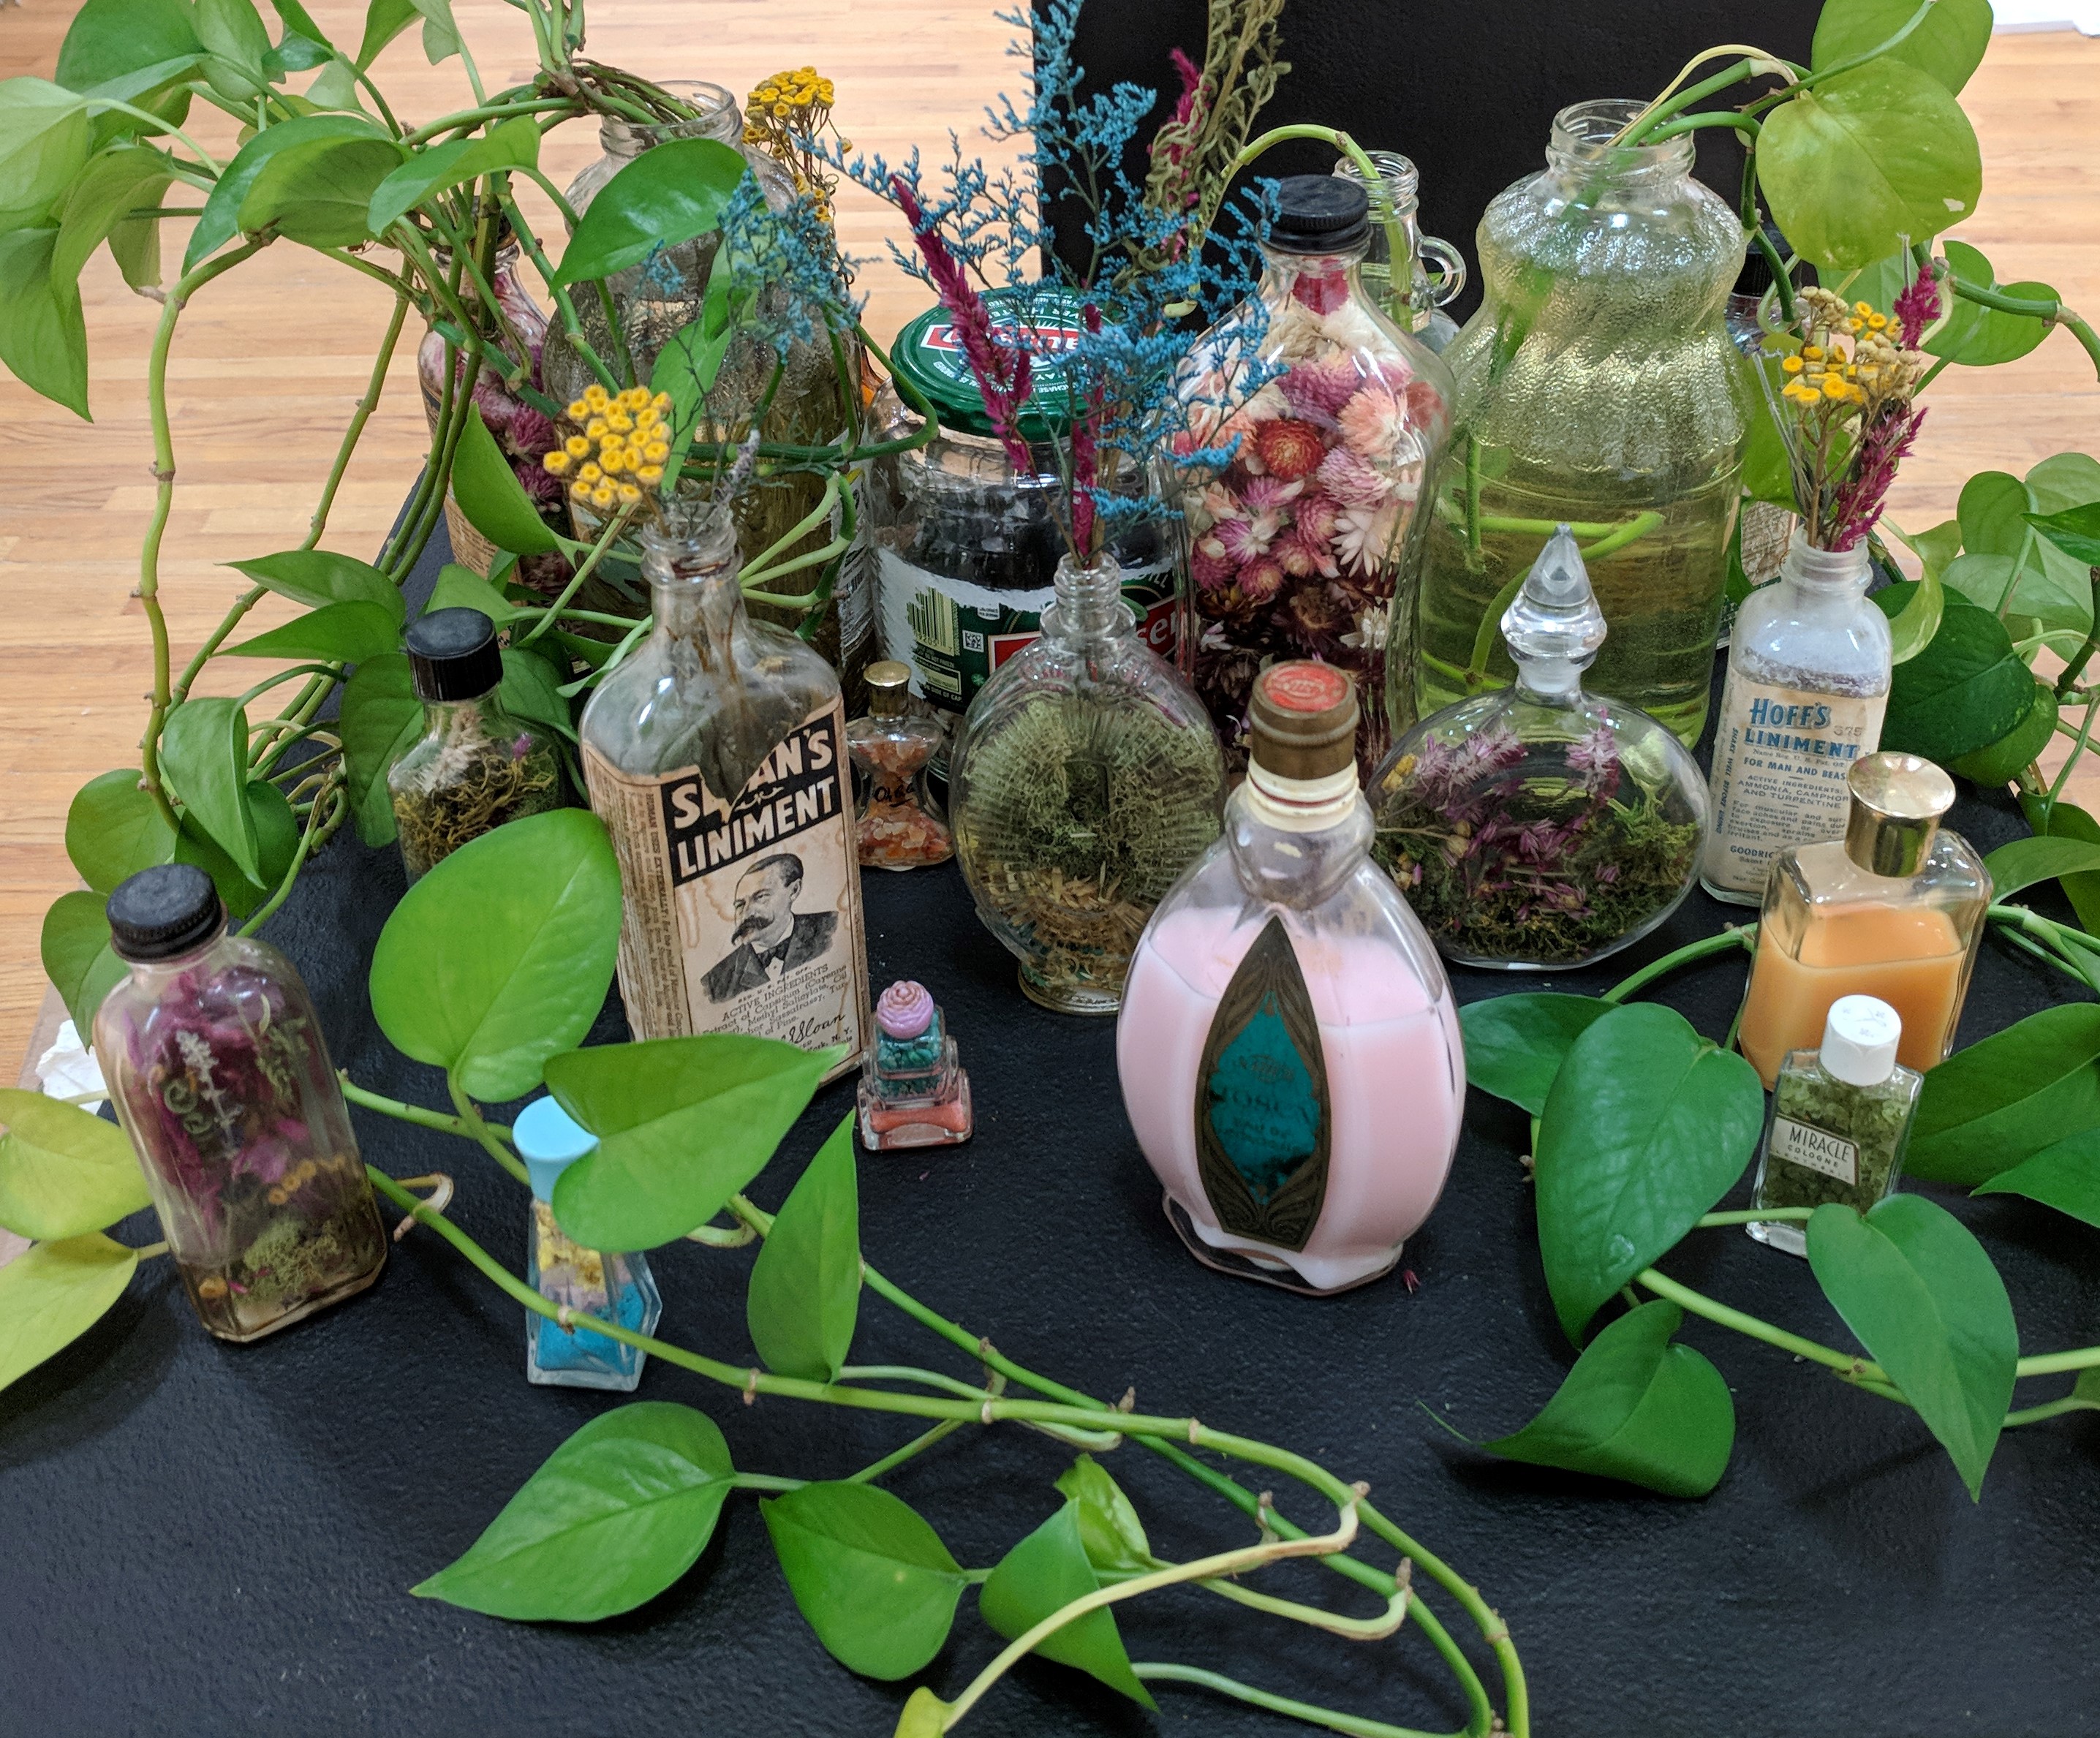 Living plants in jars of water, vintage perfume bottles with colored water, vintage apothecary bottles filled with dried flowers, some filled with green and pink crystal chips